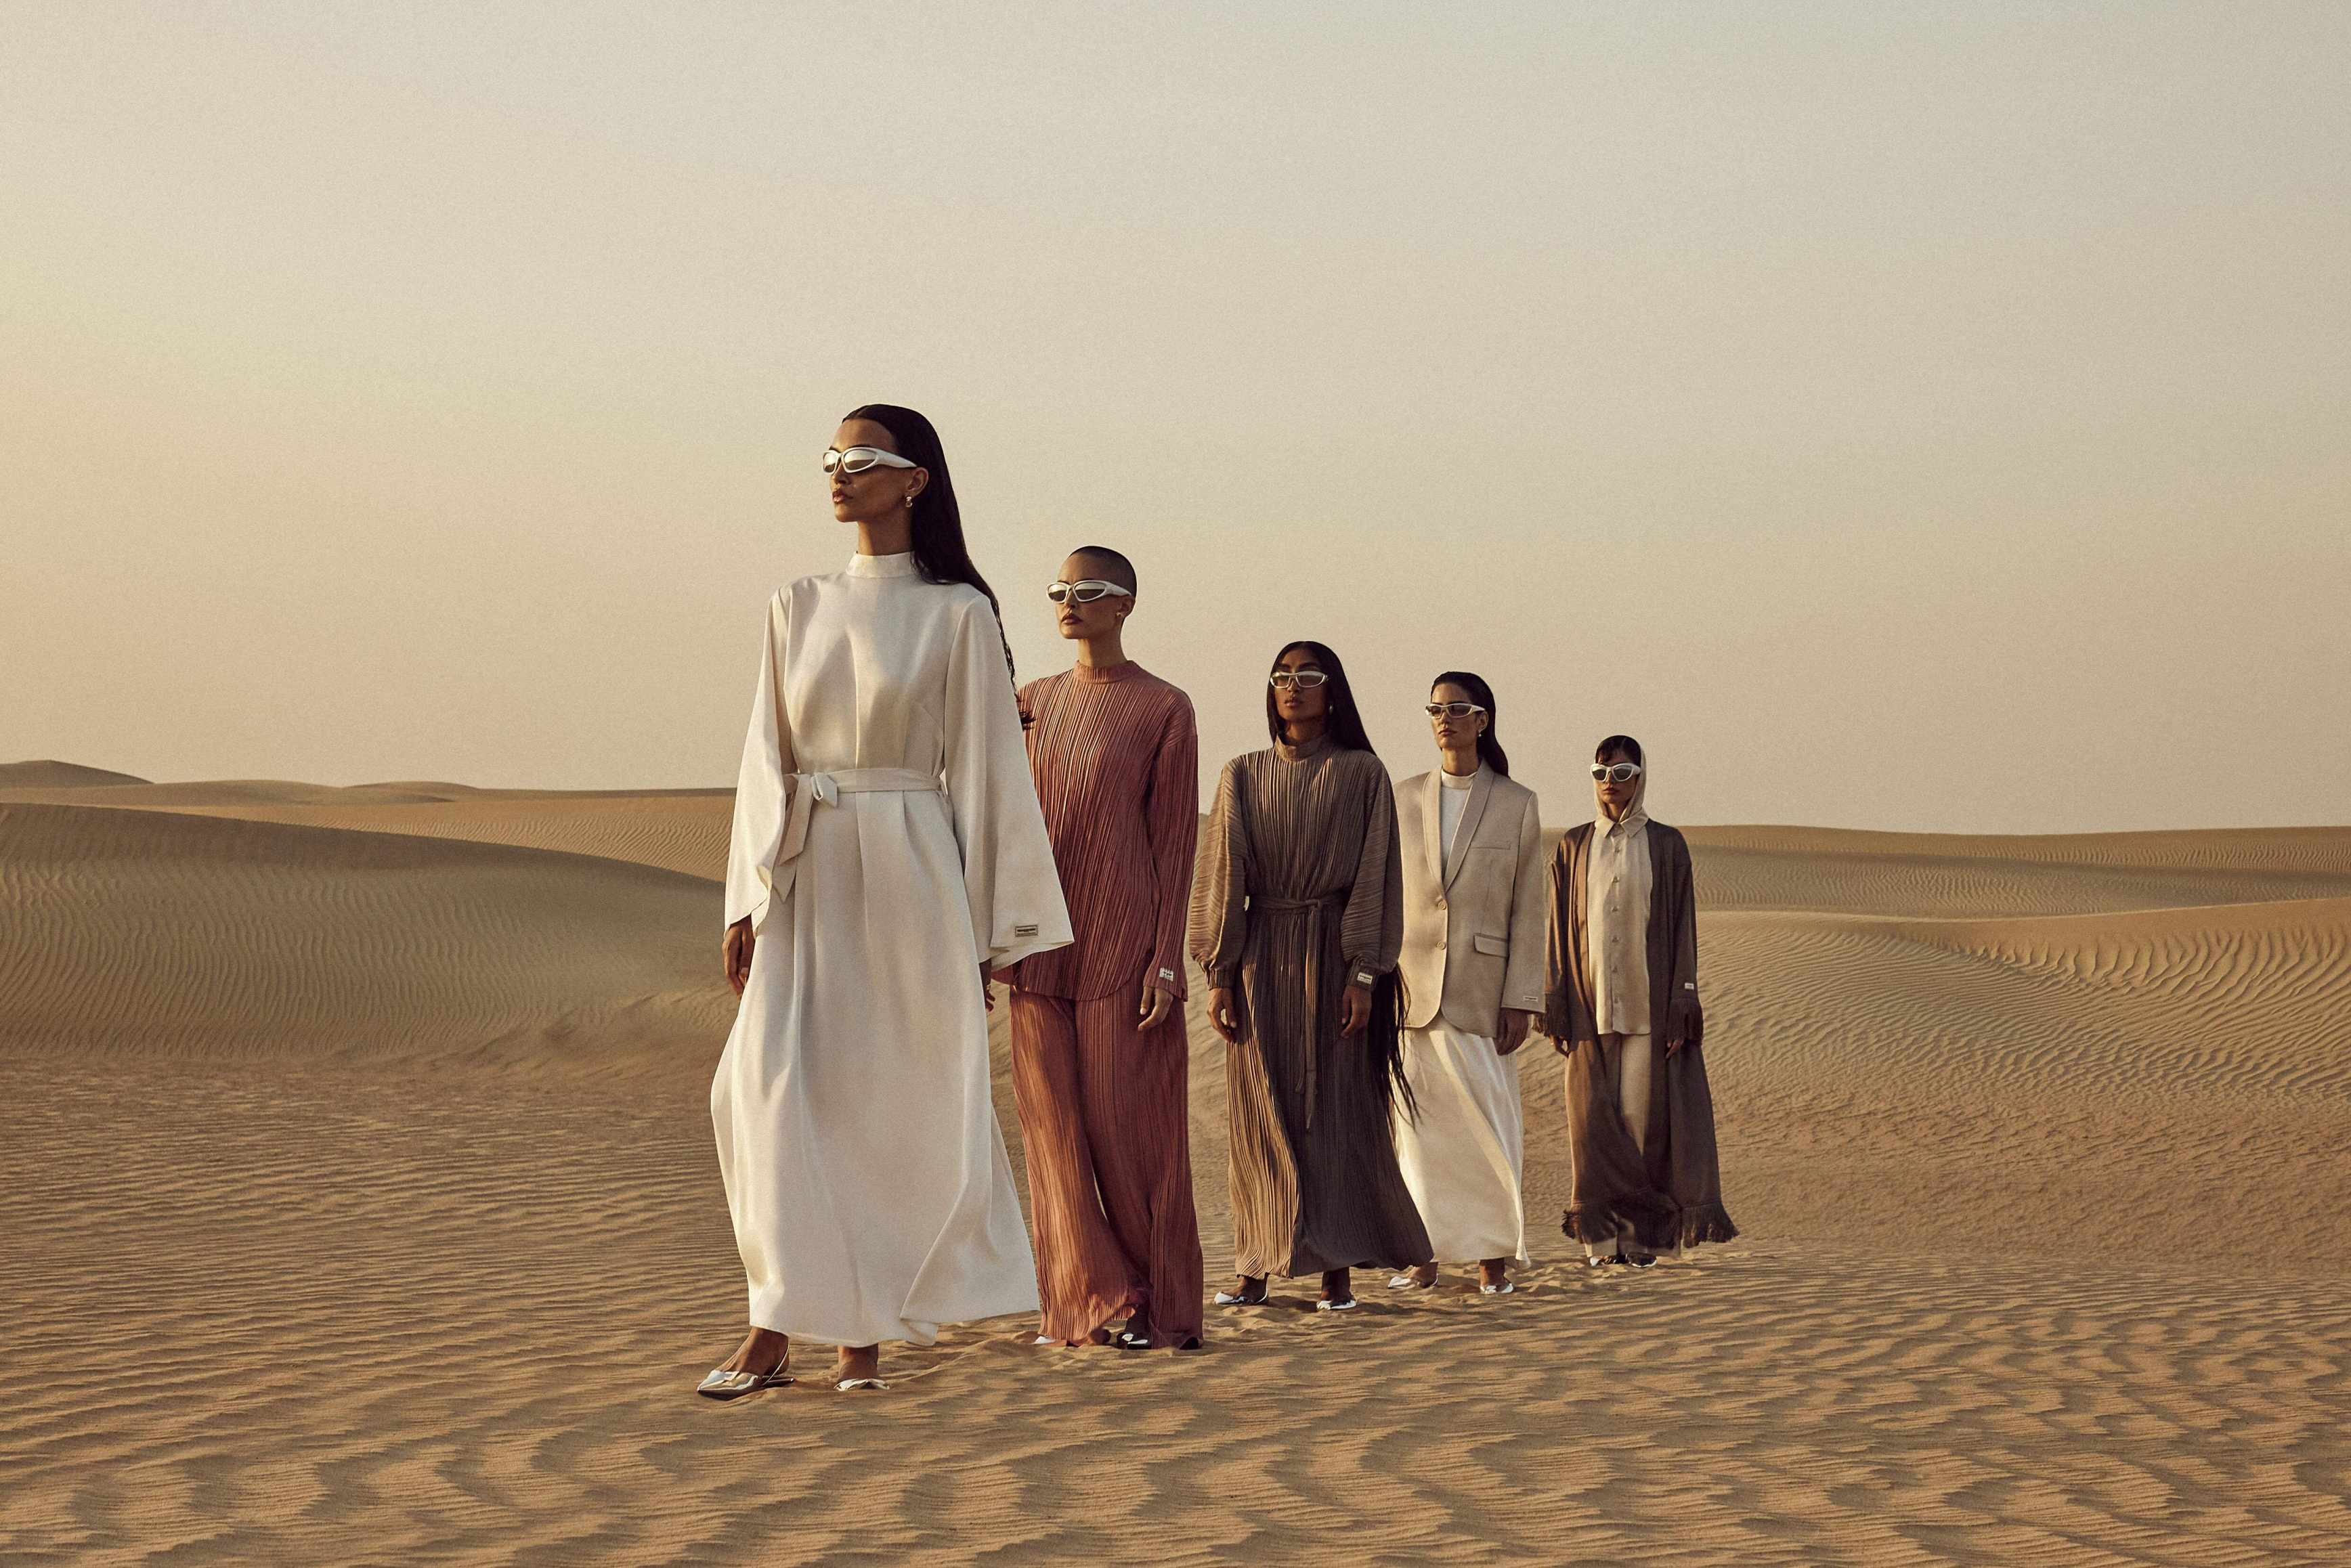 INTRODUCING THE MICHAEL KORS RAMADAN 2023 CAPSULE COLLECTION – The